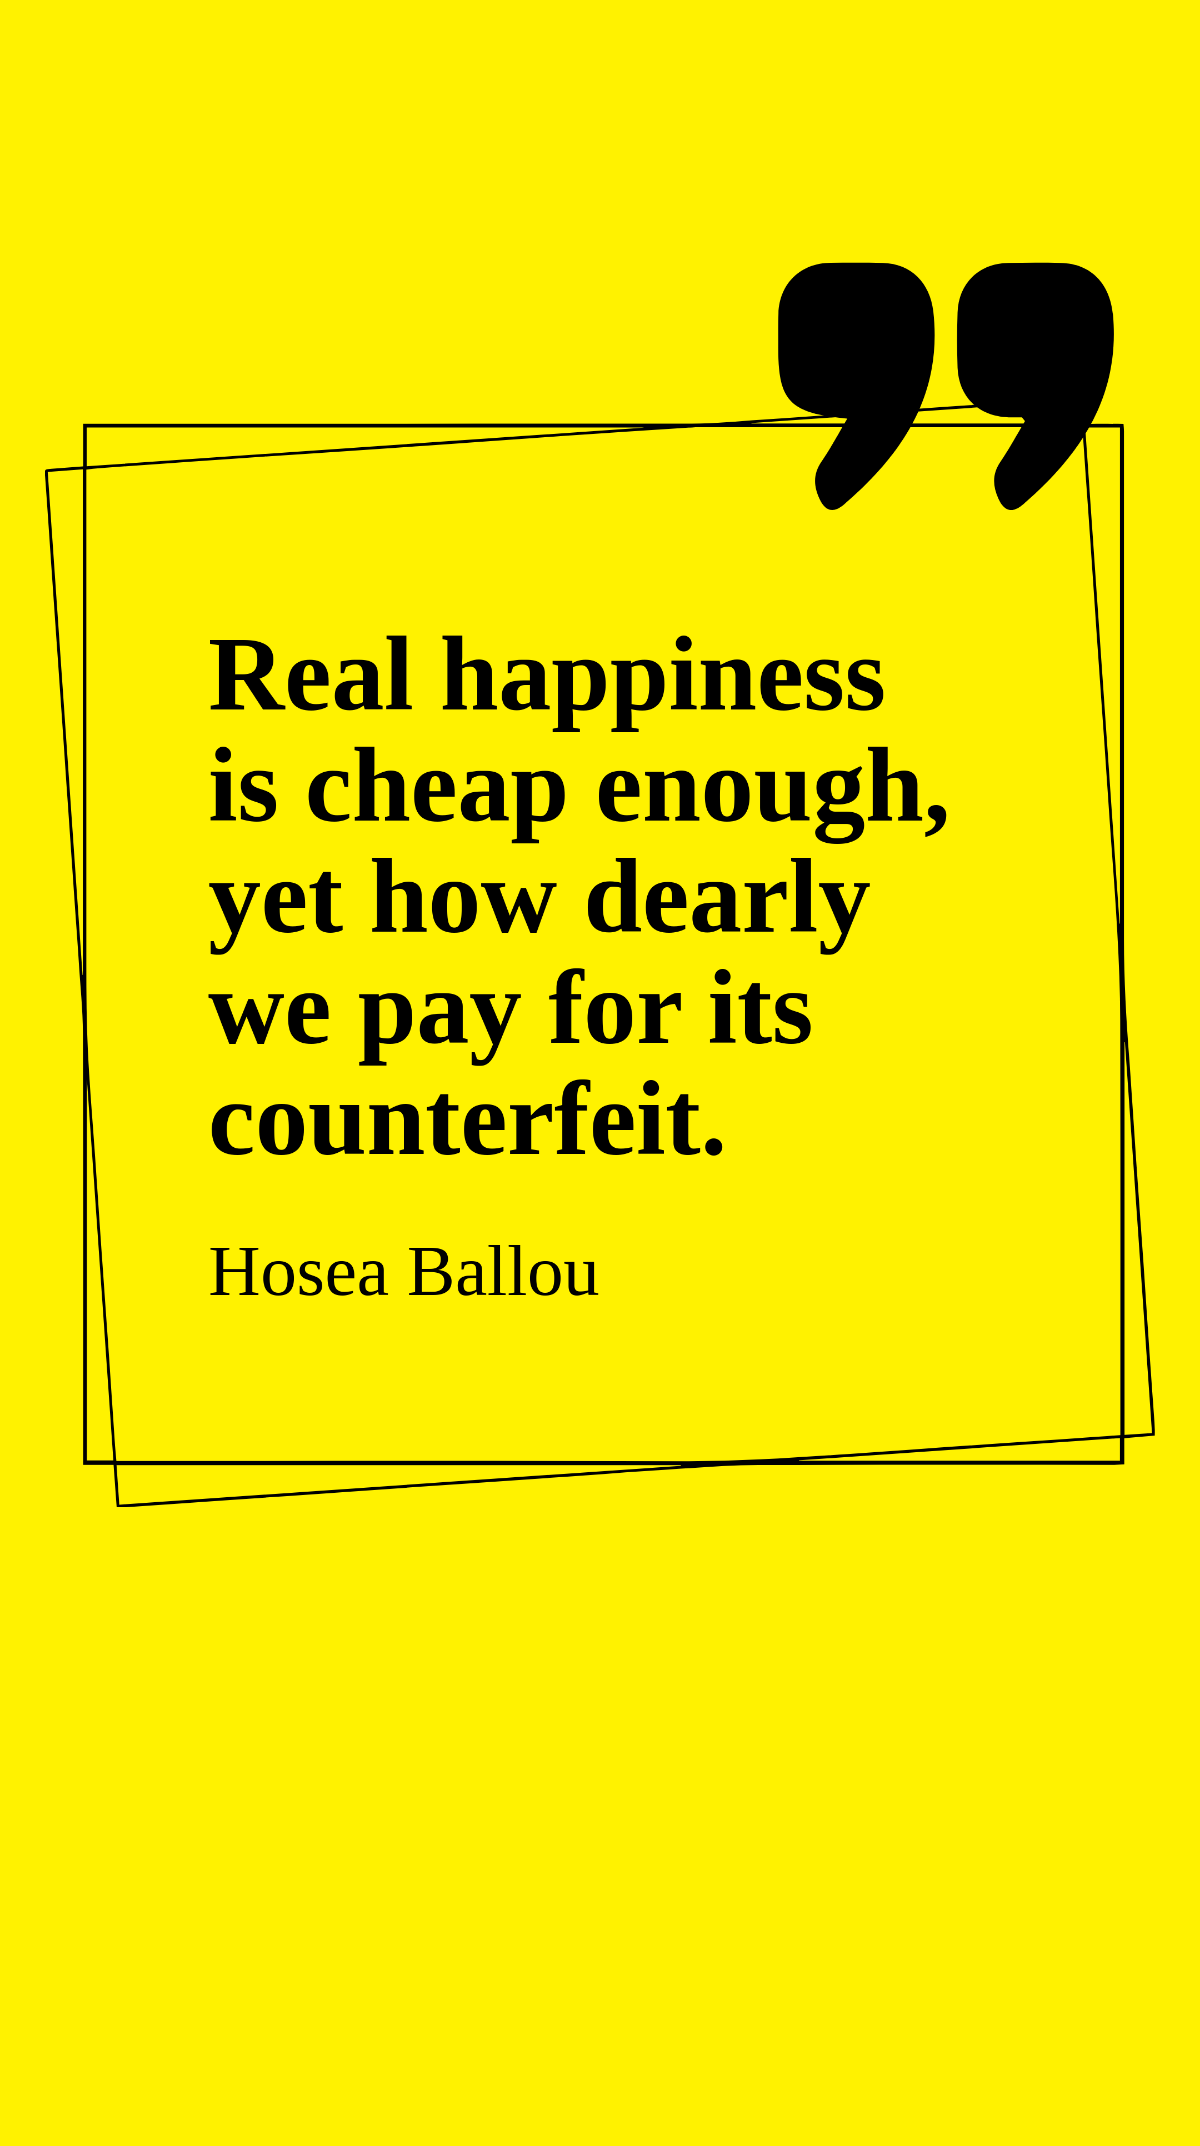 Hosea Ballou - Real happiness is cheap enough, yet how dearly we pay for its counterfeit. Template